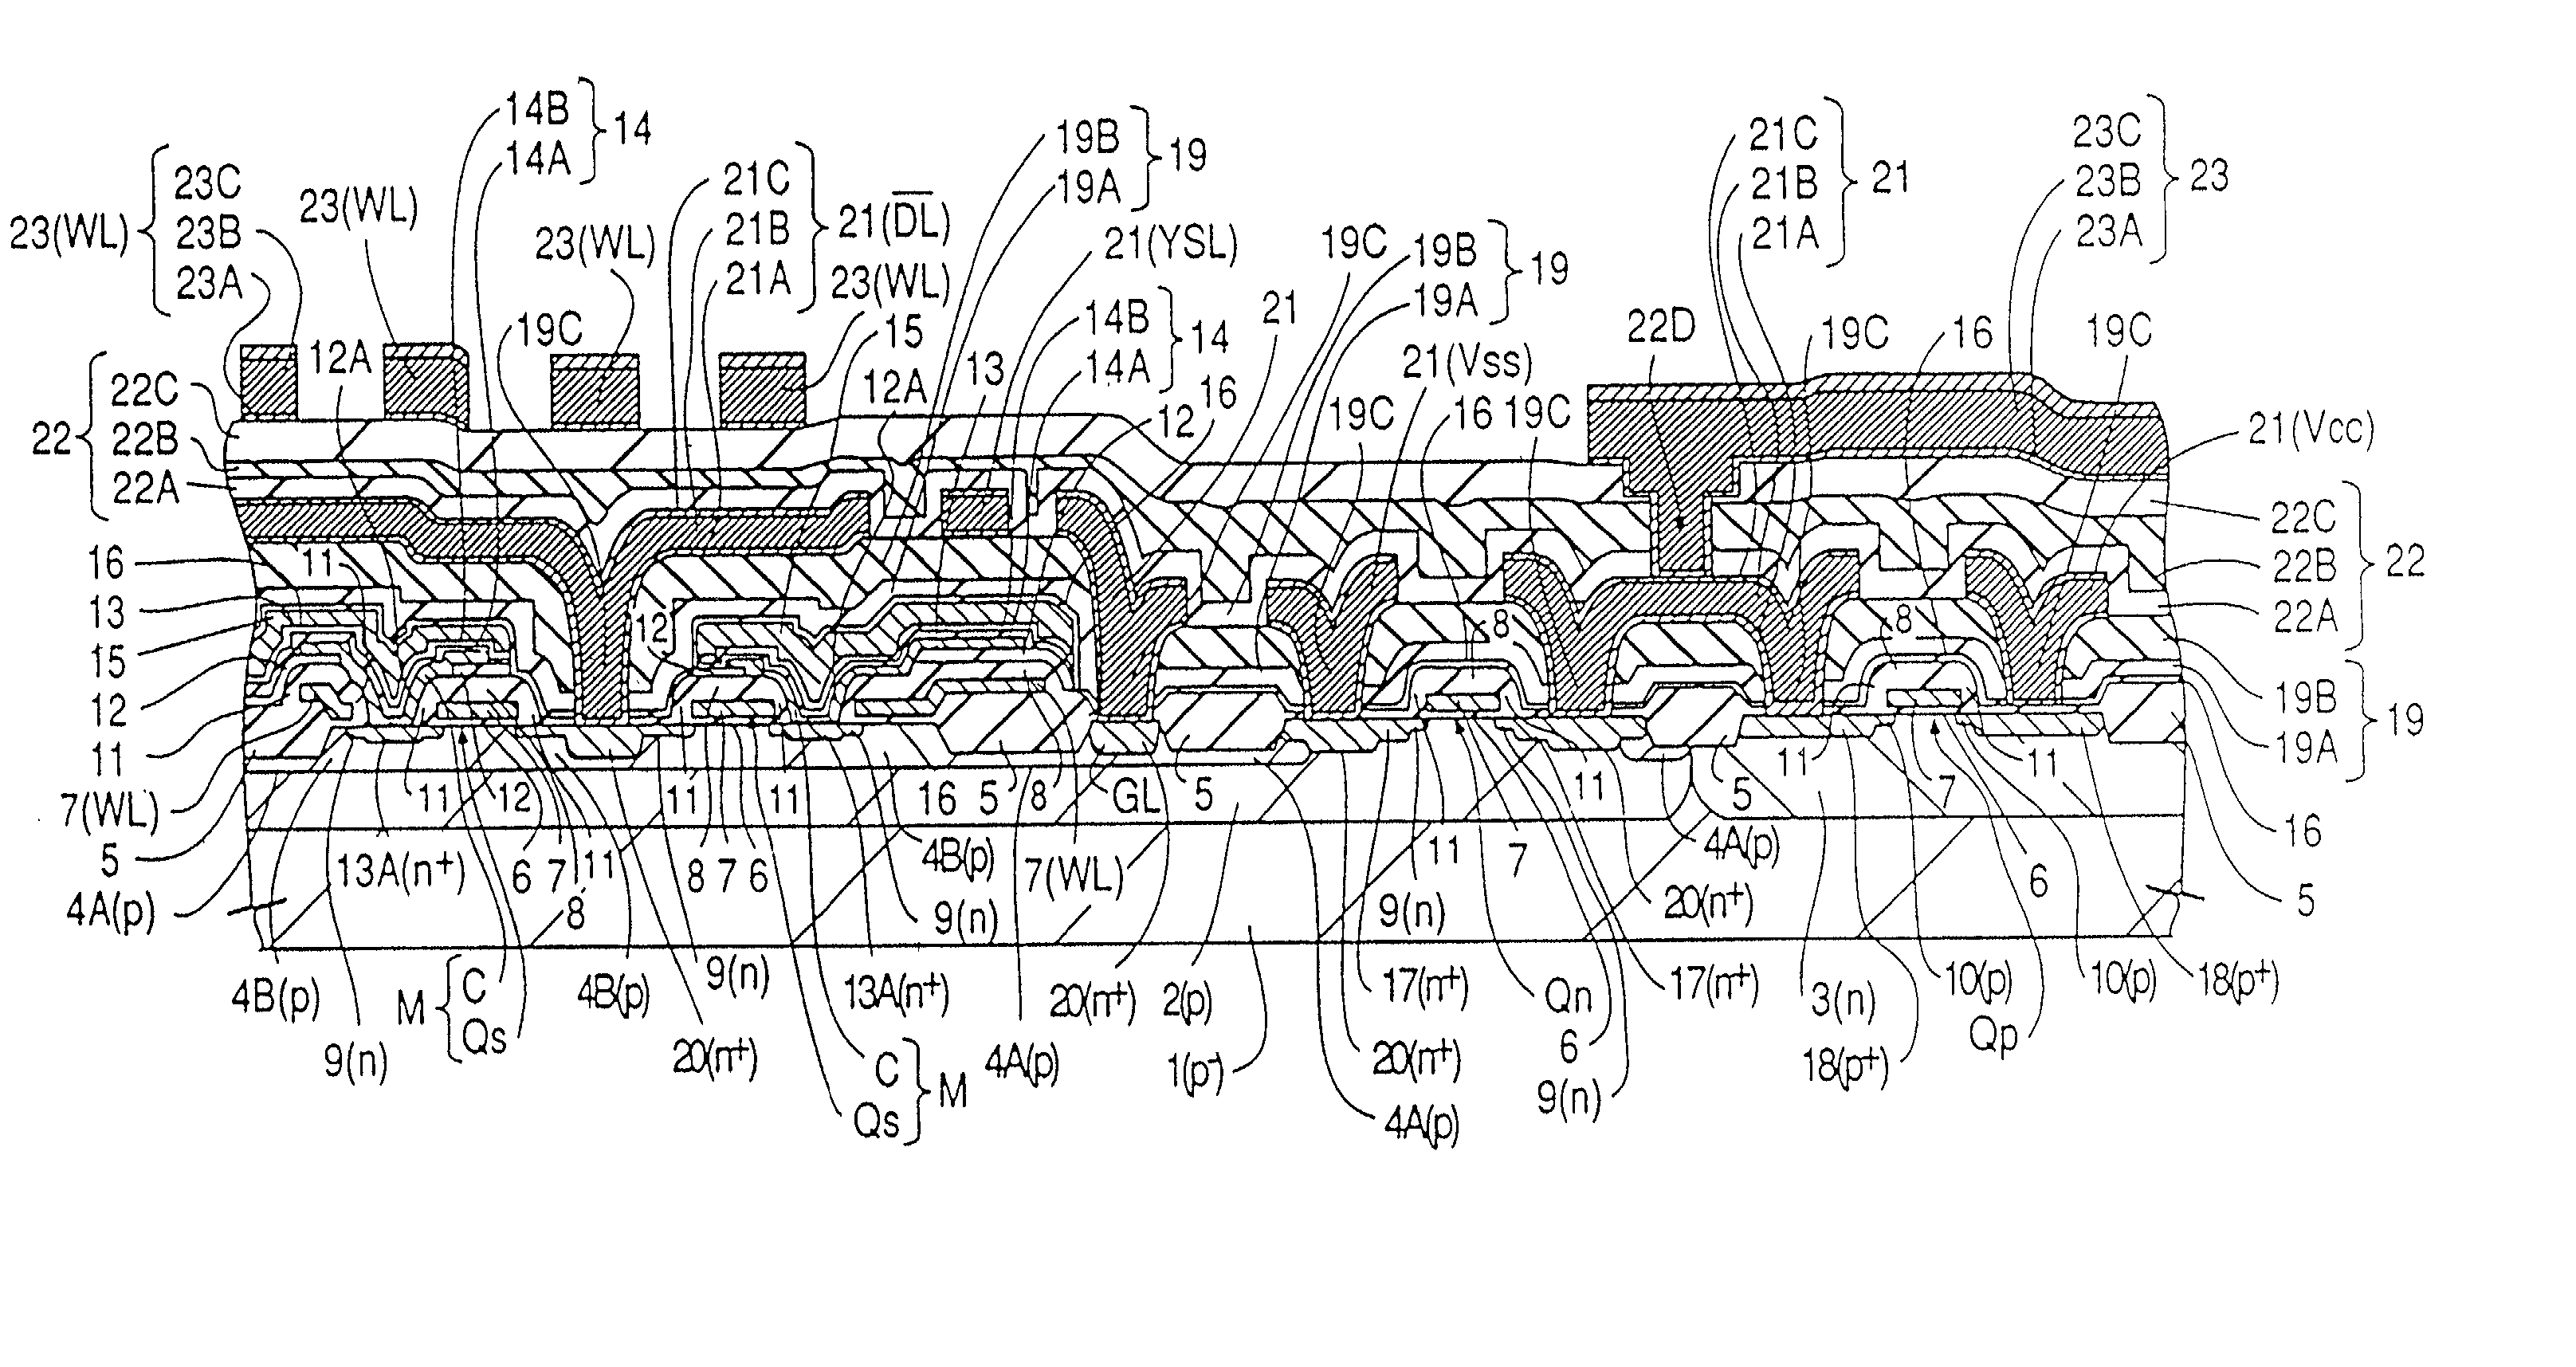 Semiconductor integrated circuit device having switching misfet and capacitor element and method of producing the same, including wiring therefor and method of producing such wiring